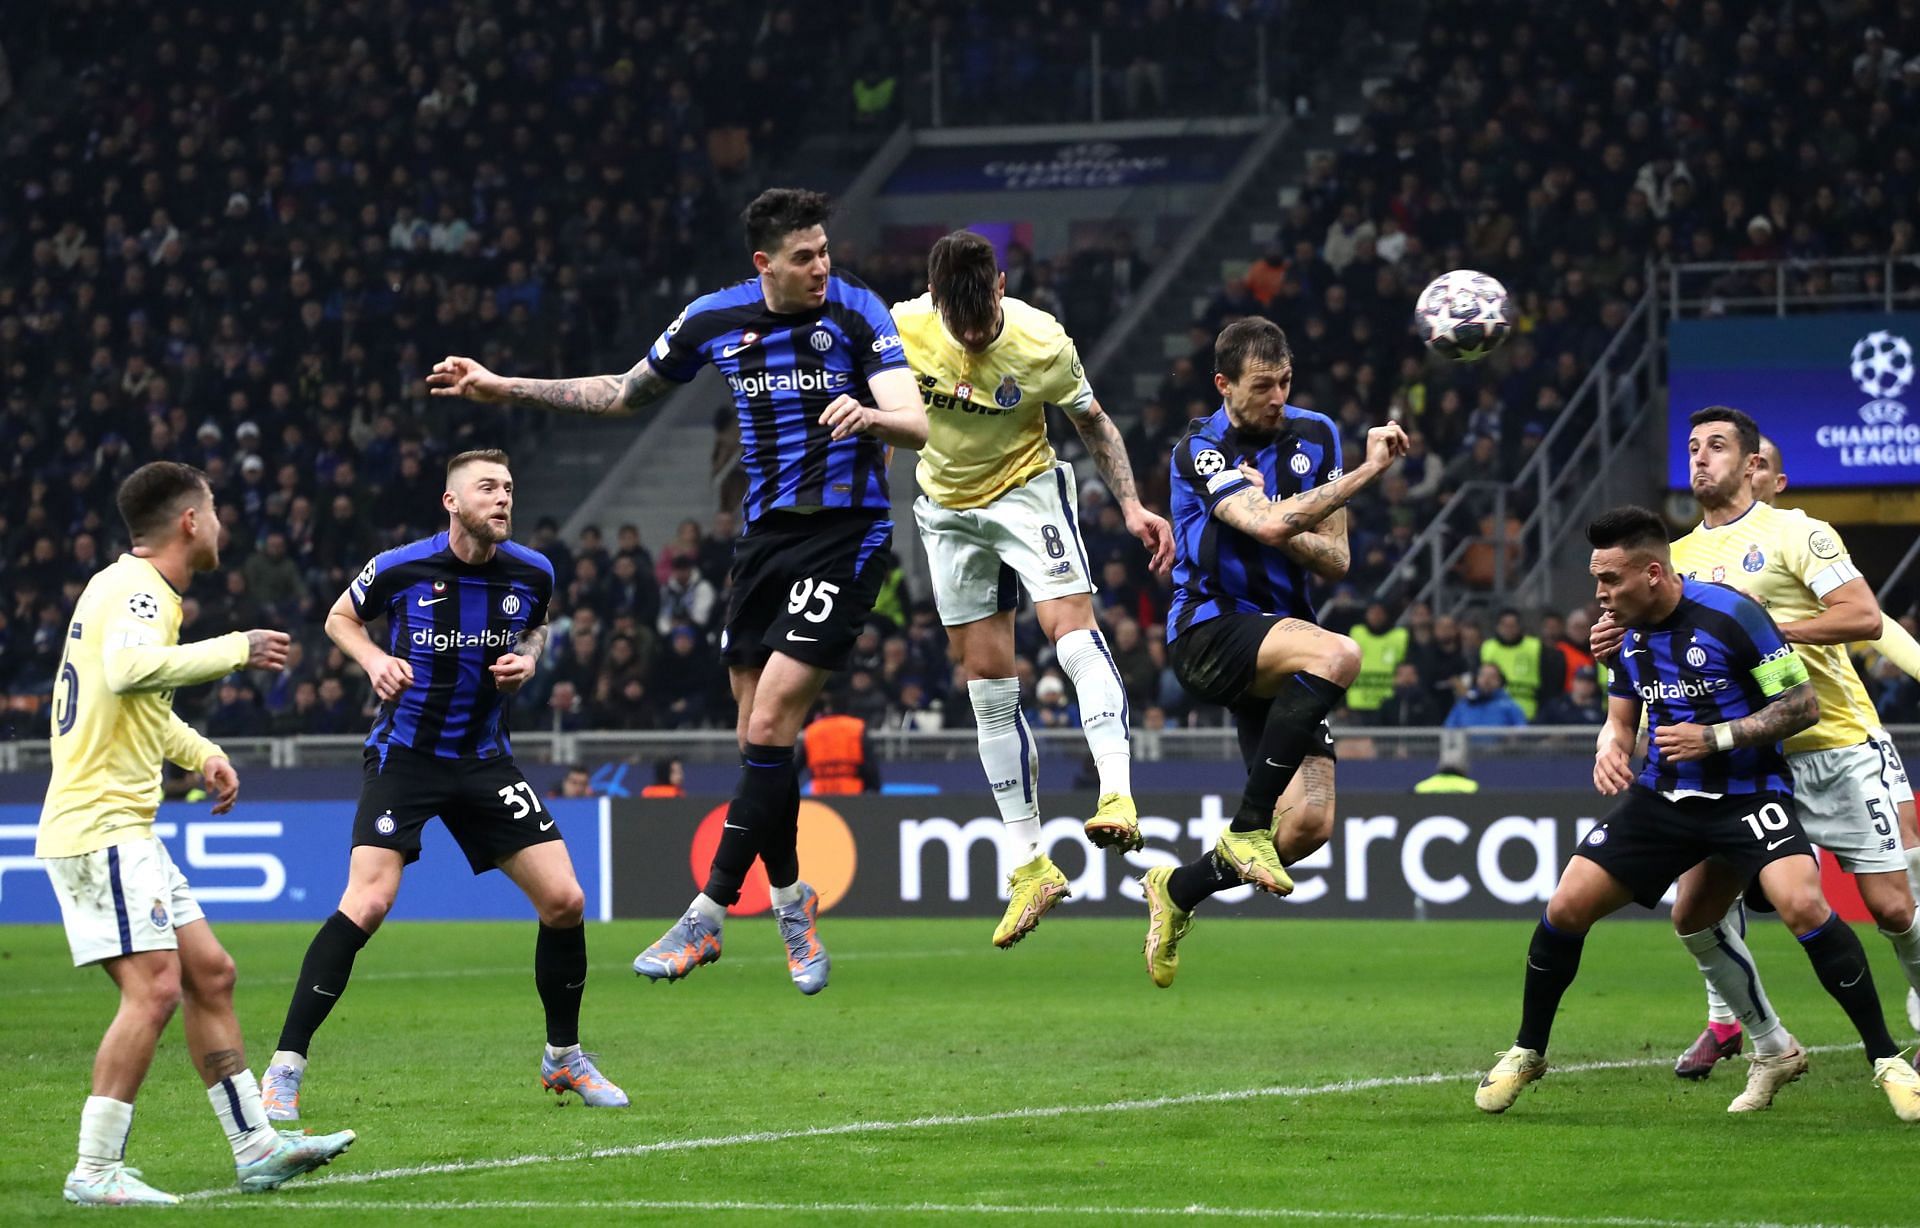 Inter vs AC Milan: Complete H2H record in the Champions League